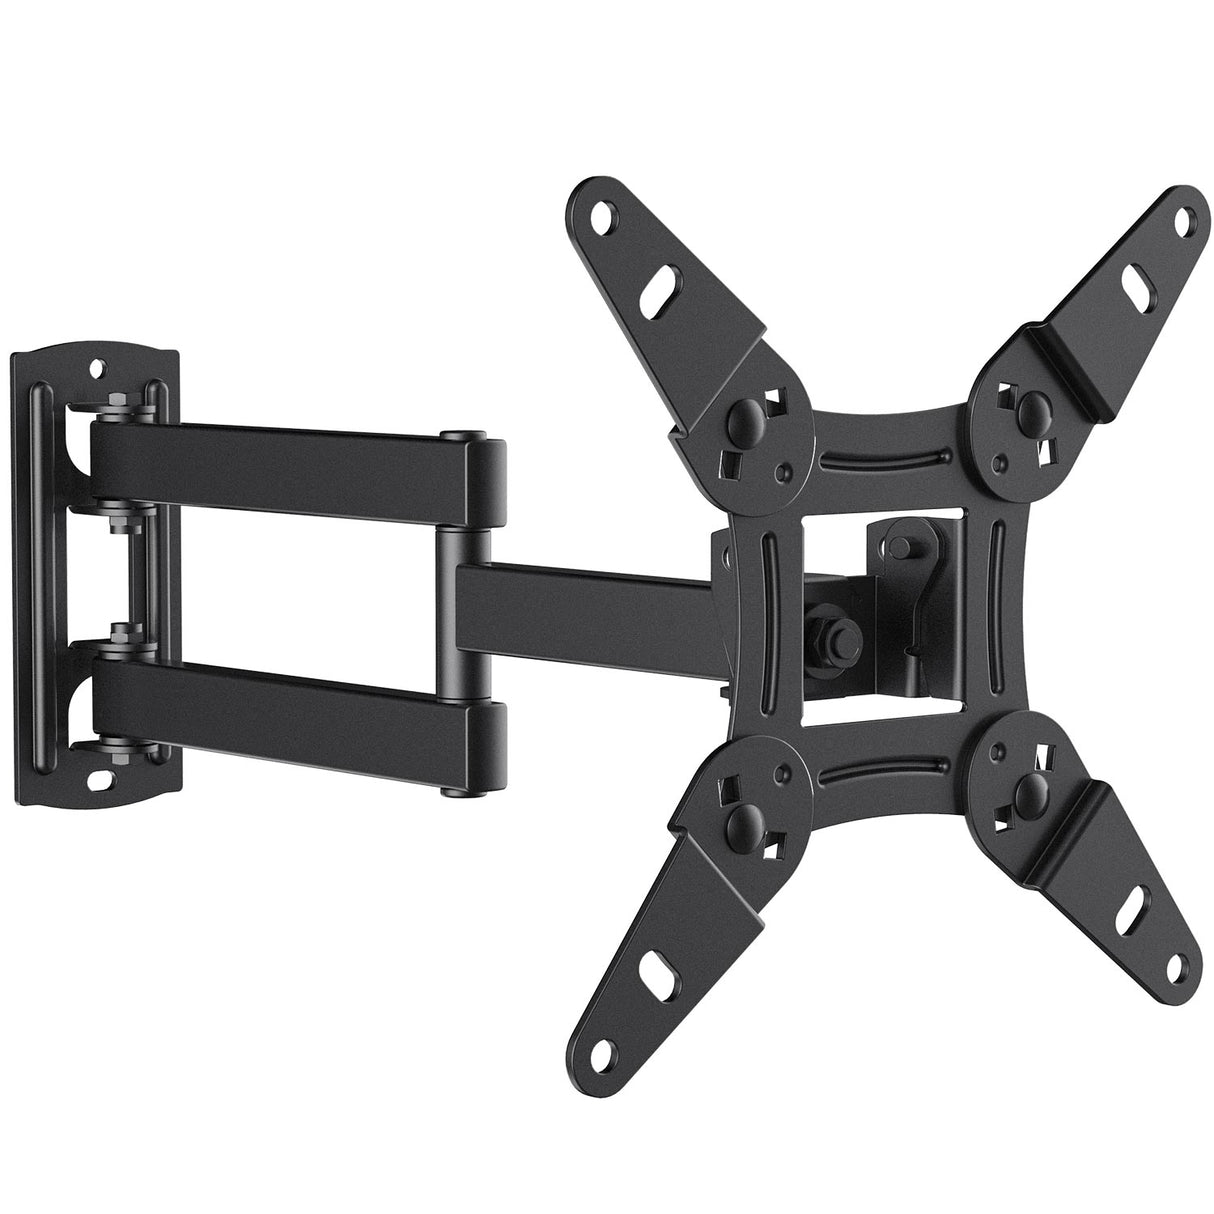 ERMMS1-01B Motion Mount - Up to 32" TV's Single Stud